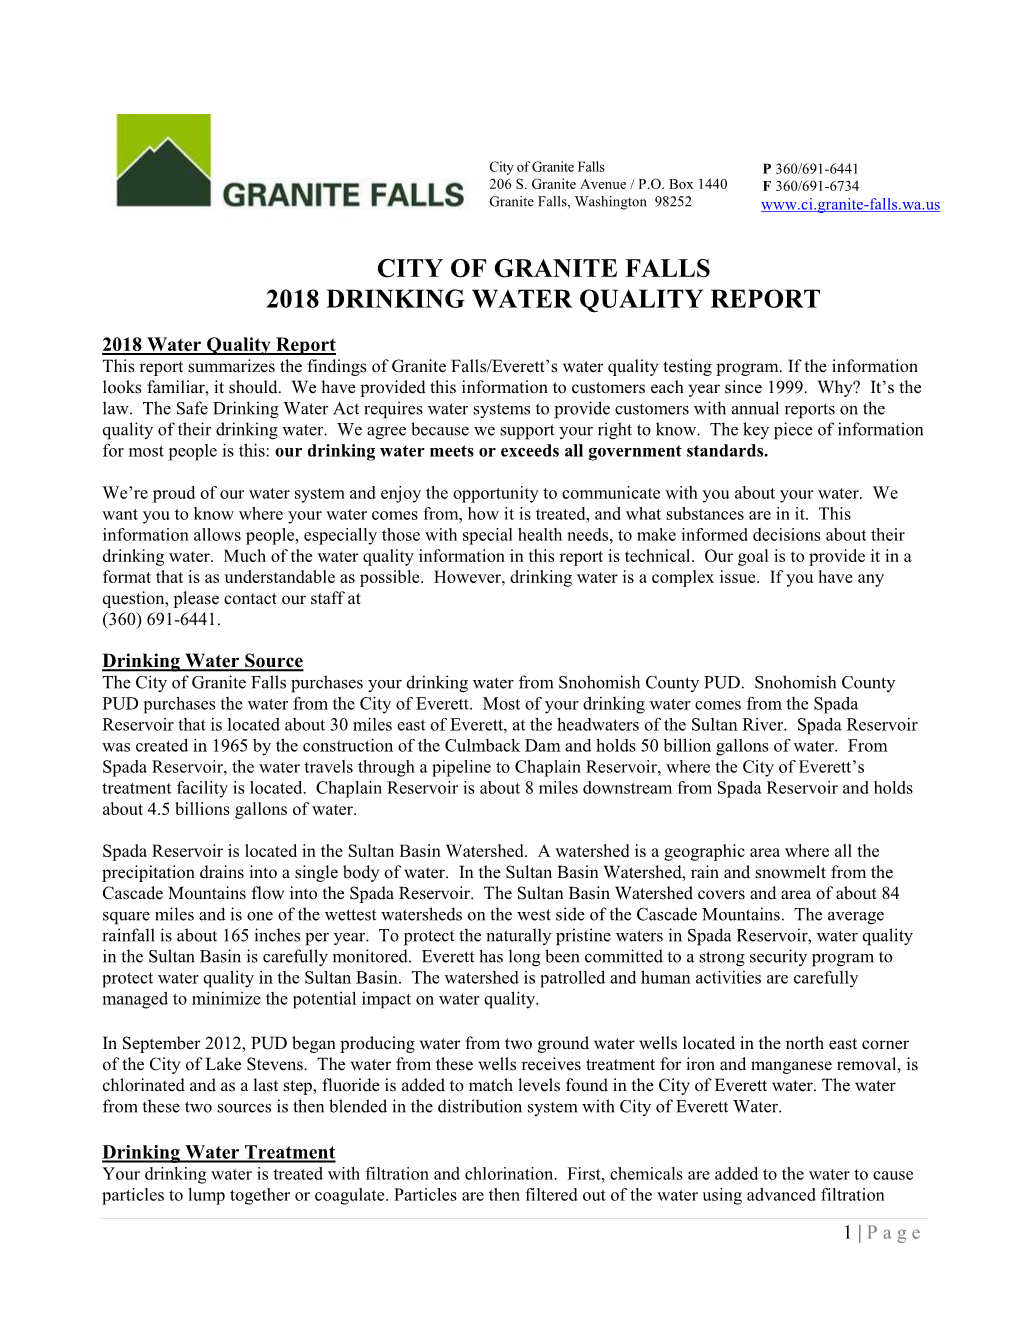 City of Granite Falls 2018 Drinking Water Quality Report